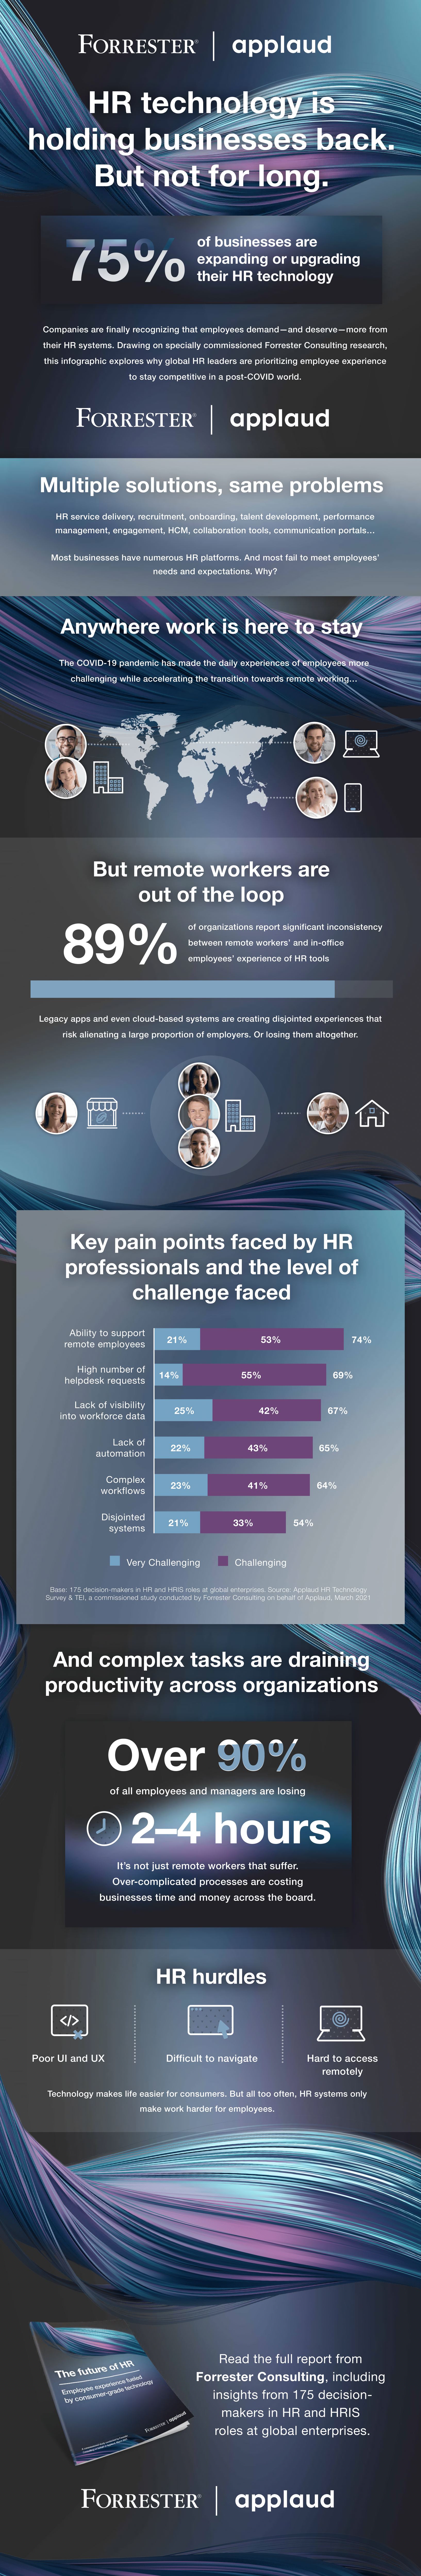 HR_technology_is_holding_businesses_back_infographic-1